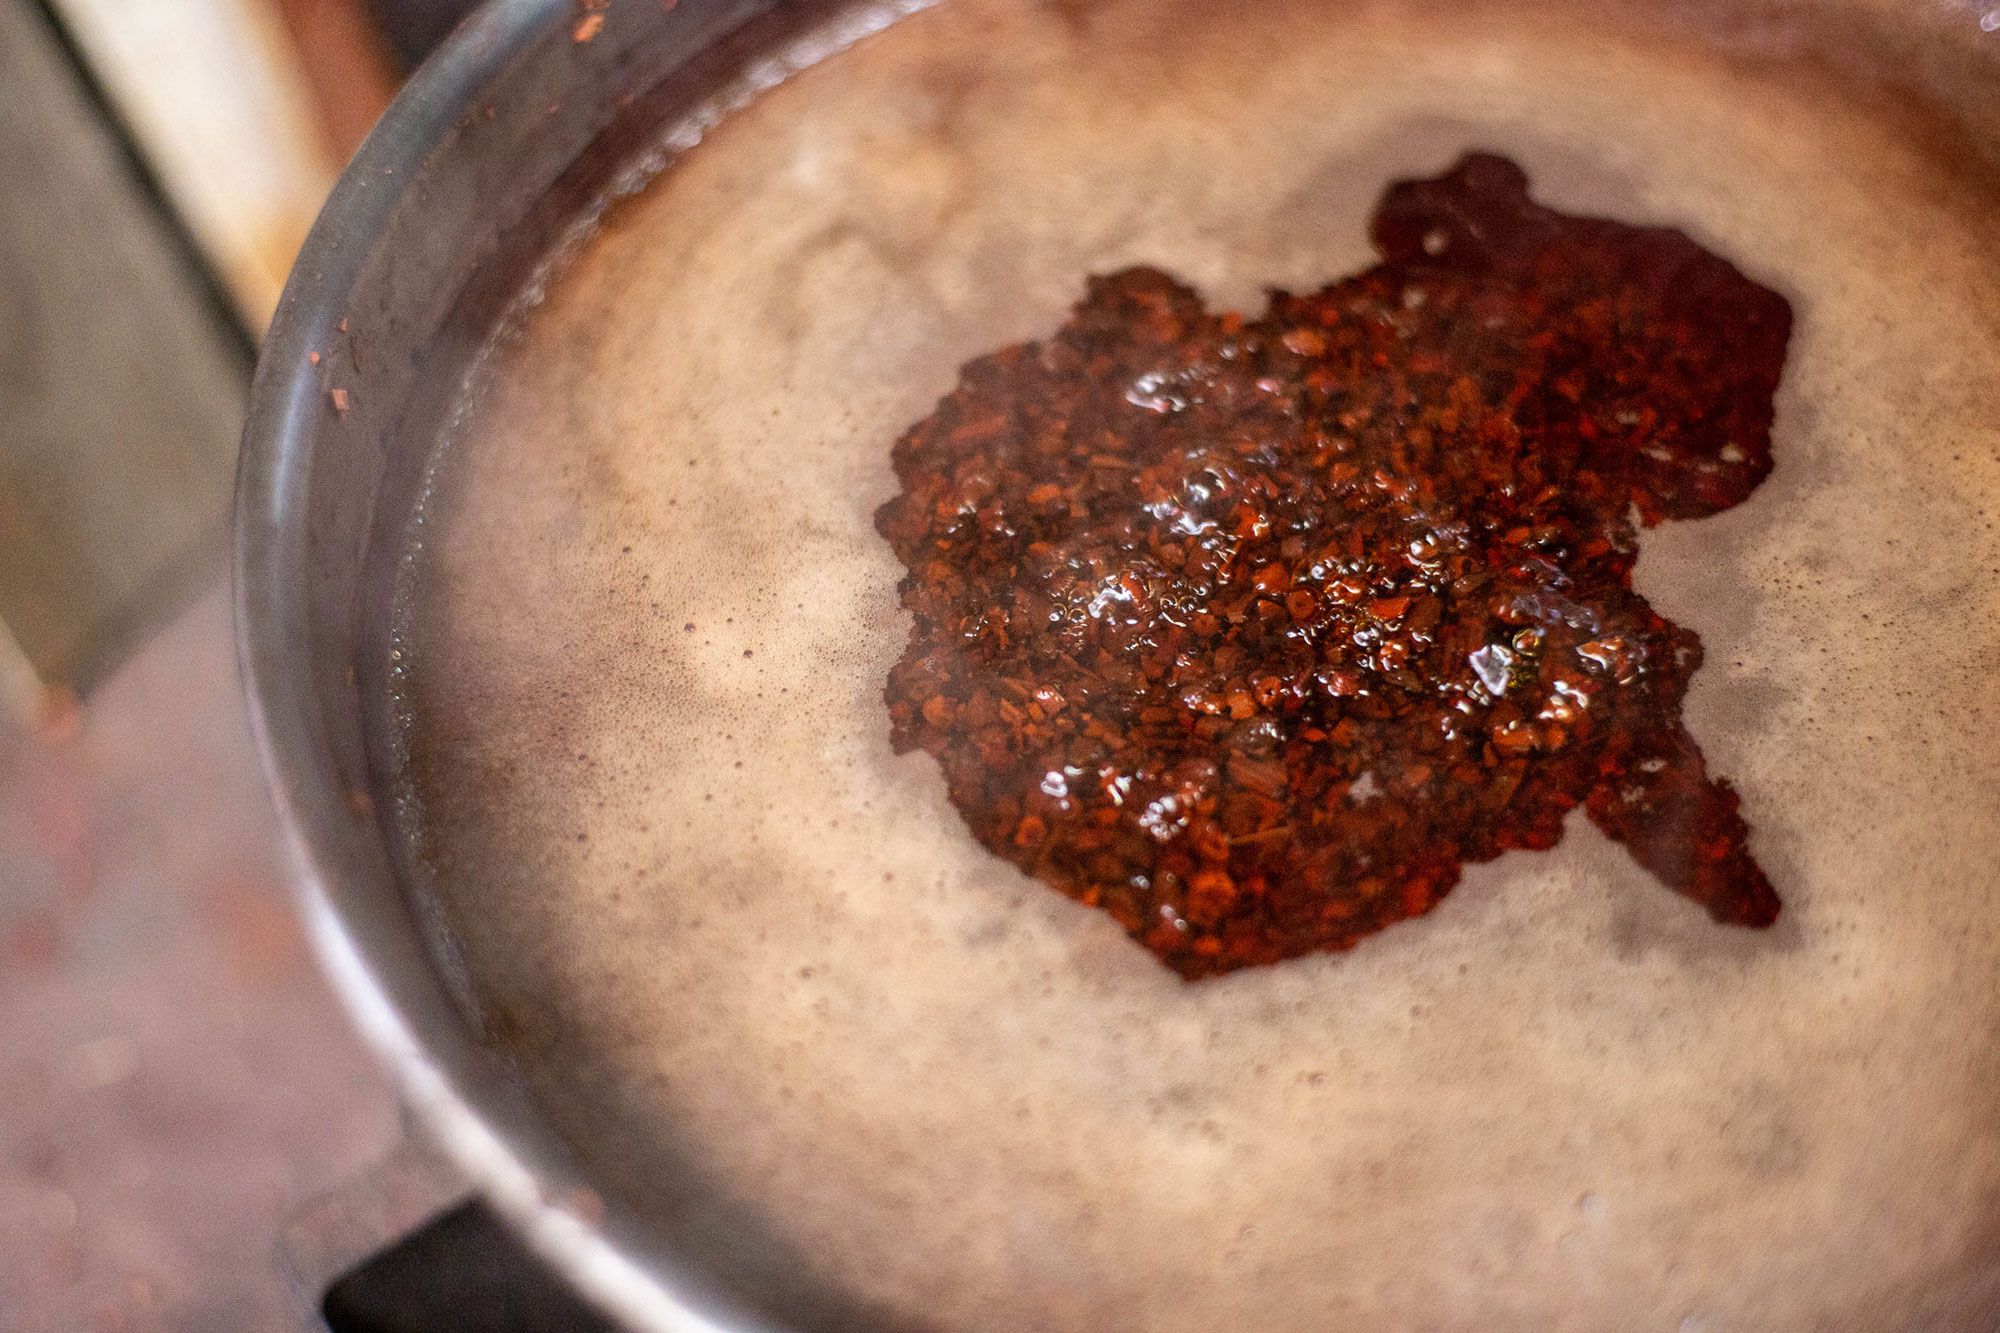 Akane(Madder) is boiled to be made into dye